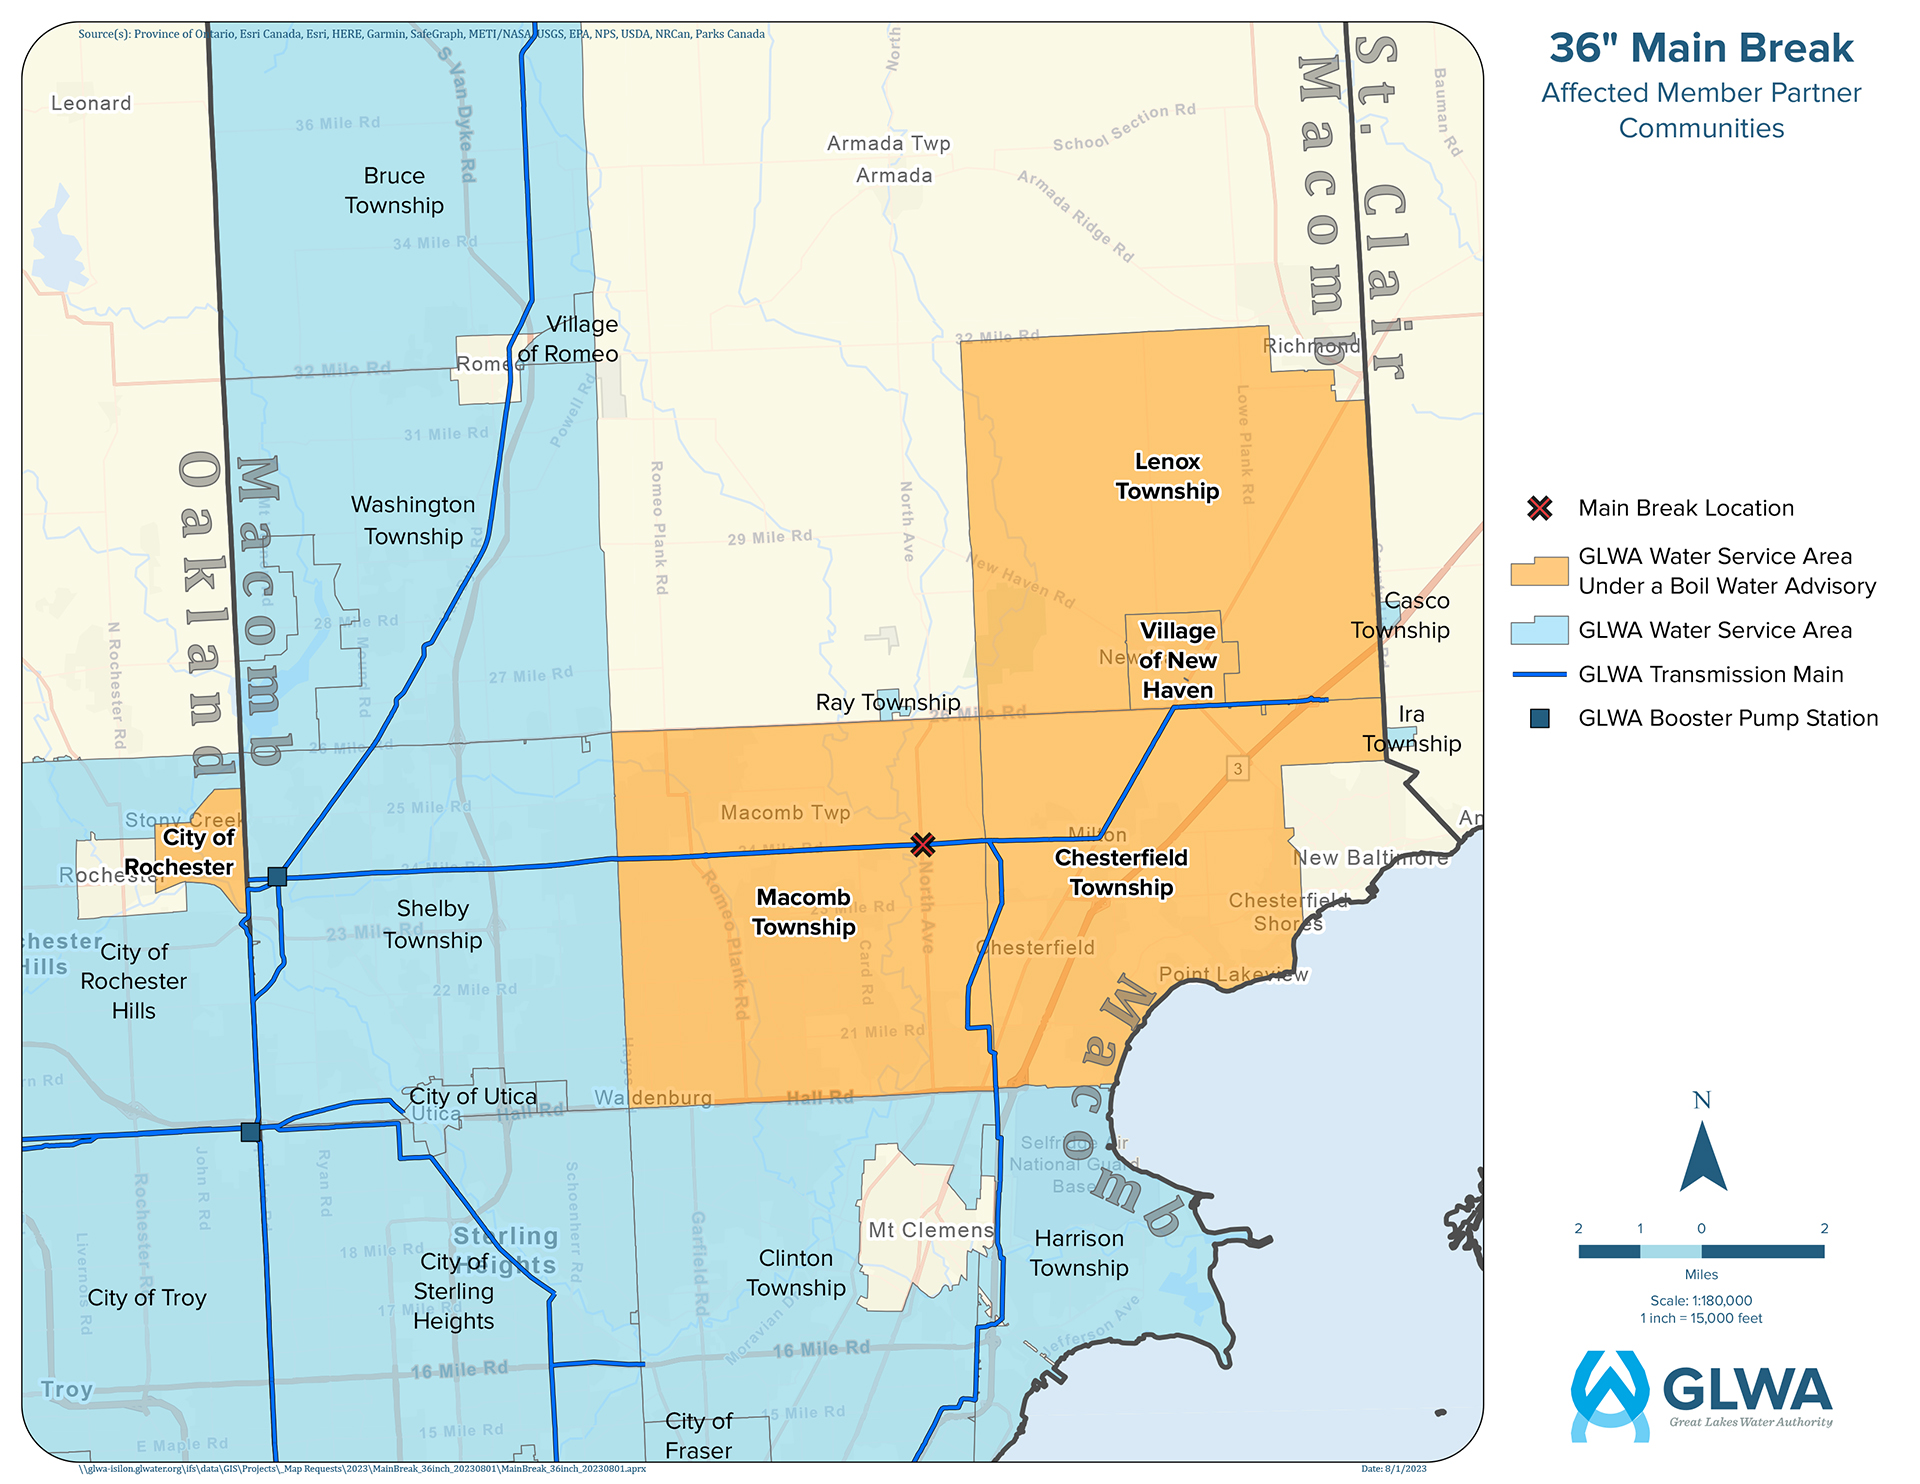 Map of affected communities in Macomb County under a boil water advisory.